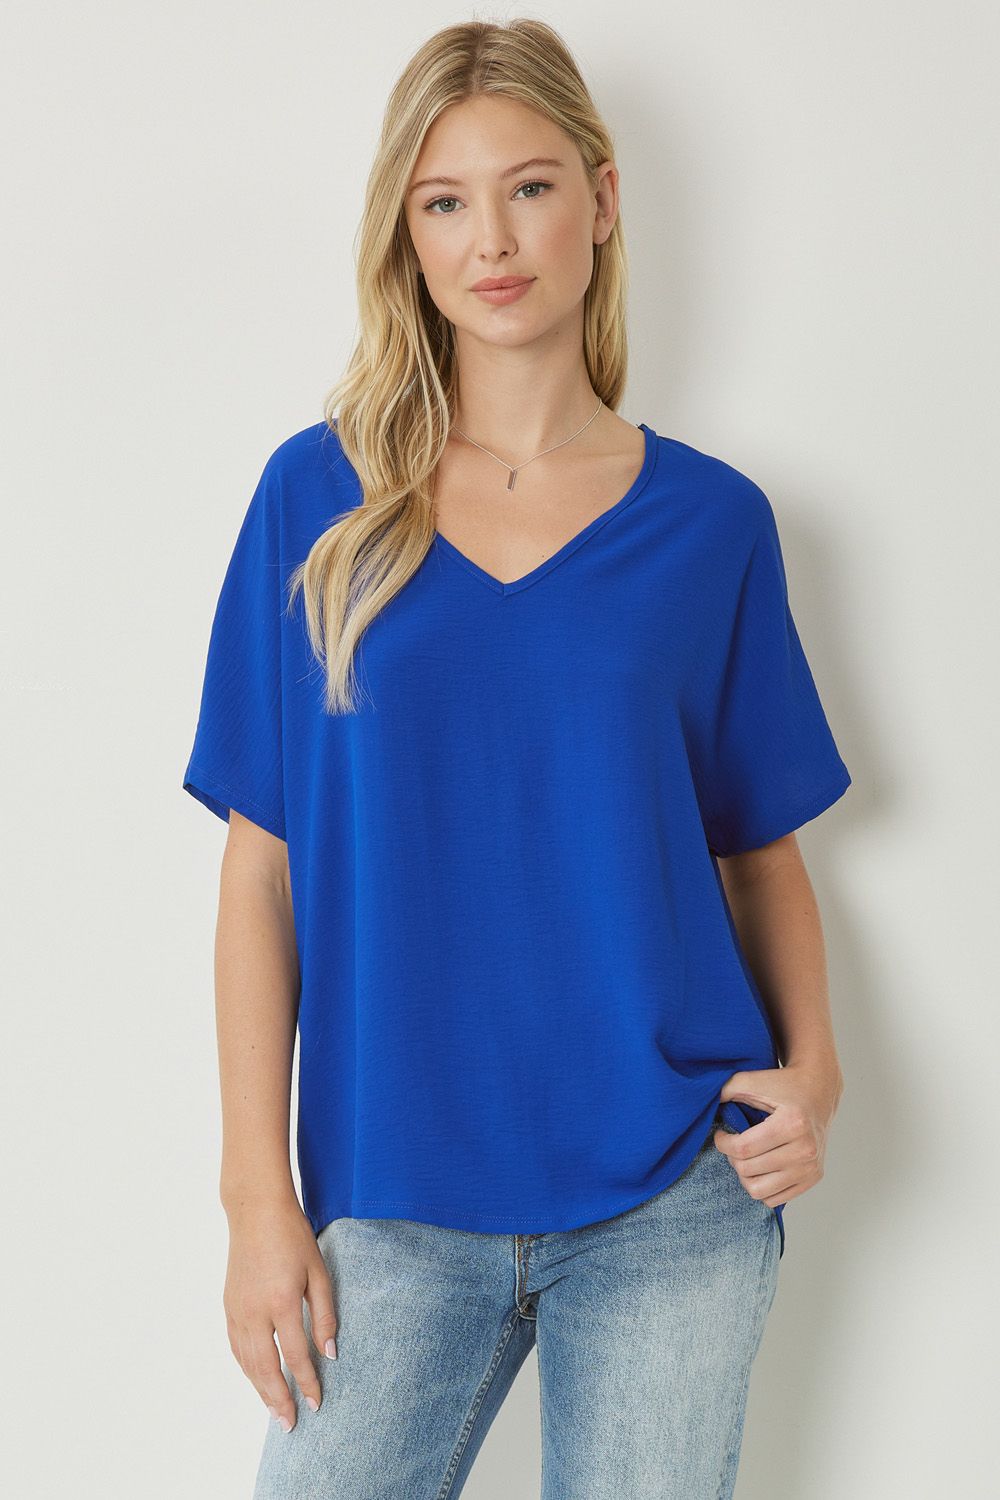 "Everyday Charm" Top (Royal) - Happily Ever Aften